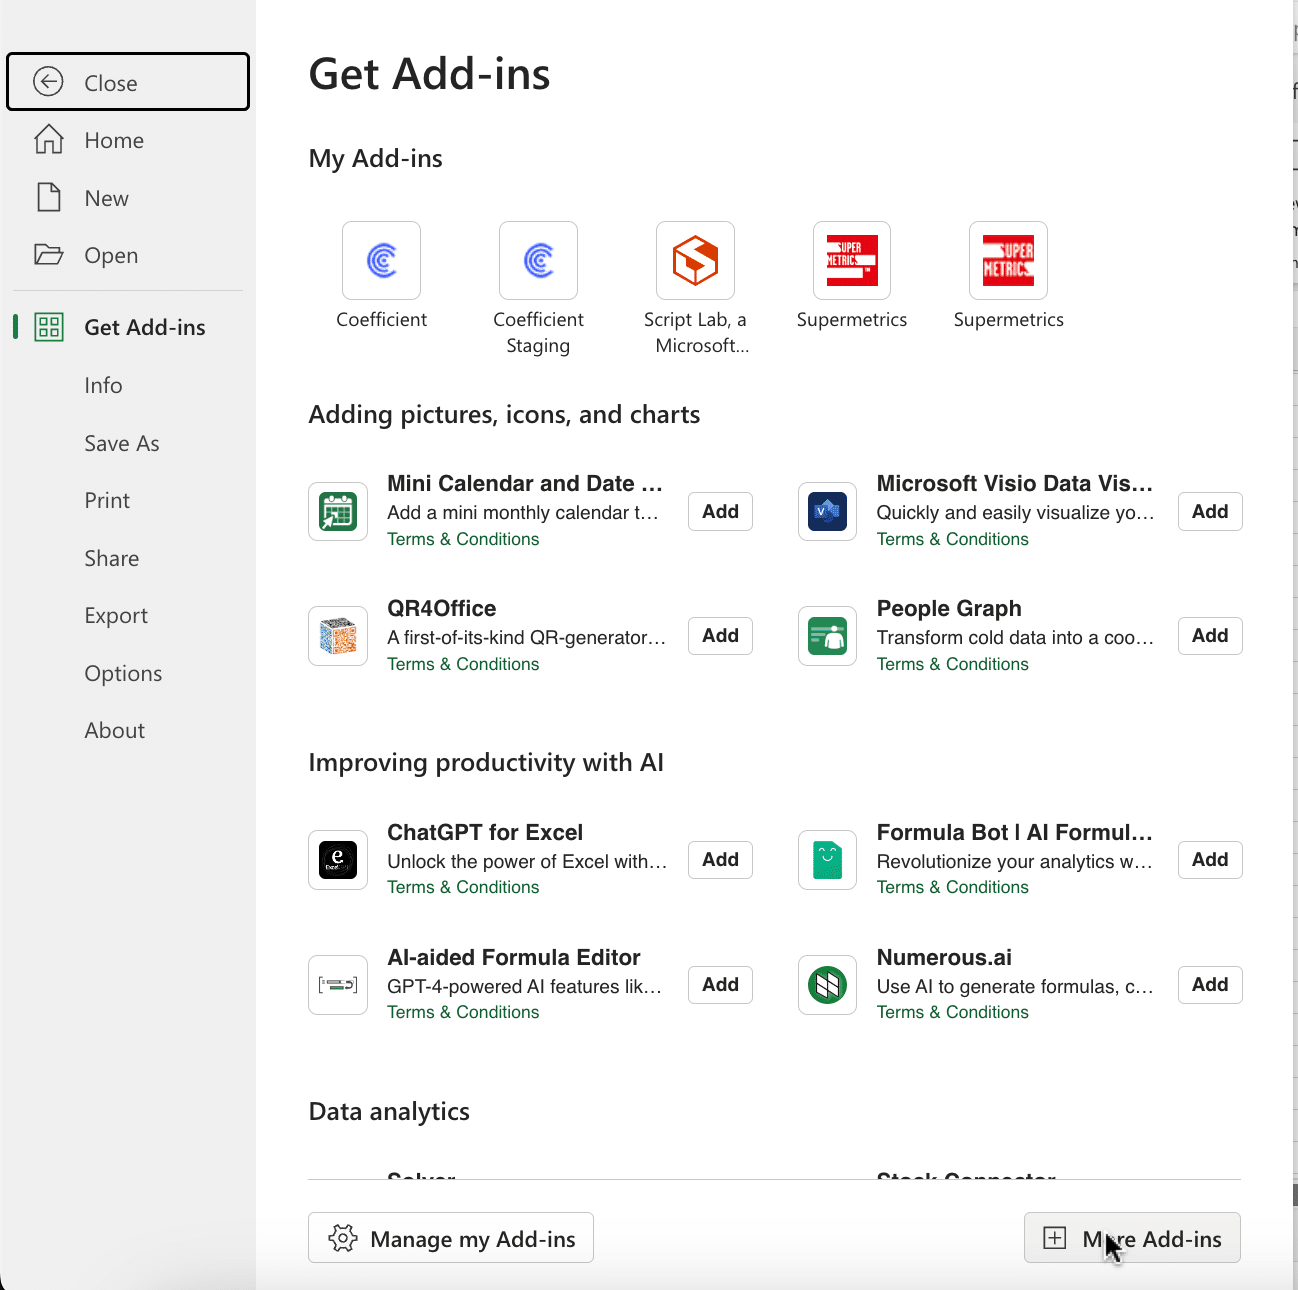 Guide on accessing More Add-Ins through the File menu in Excel